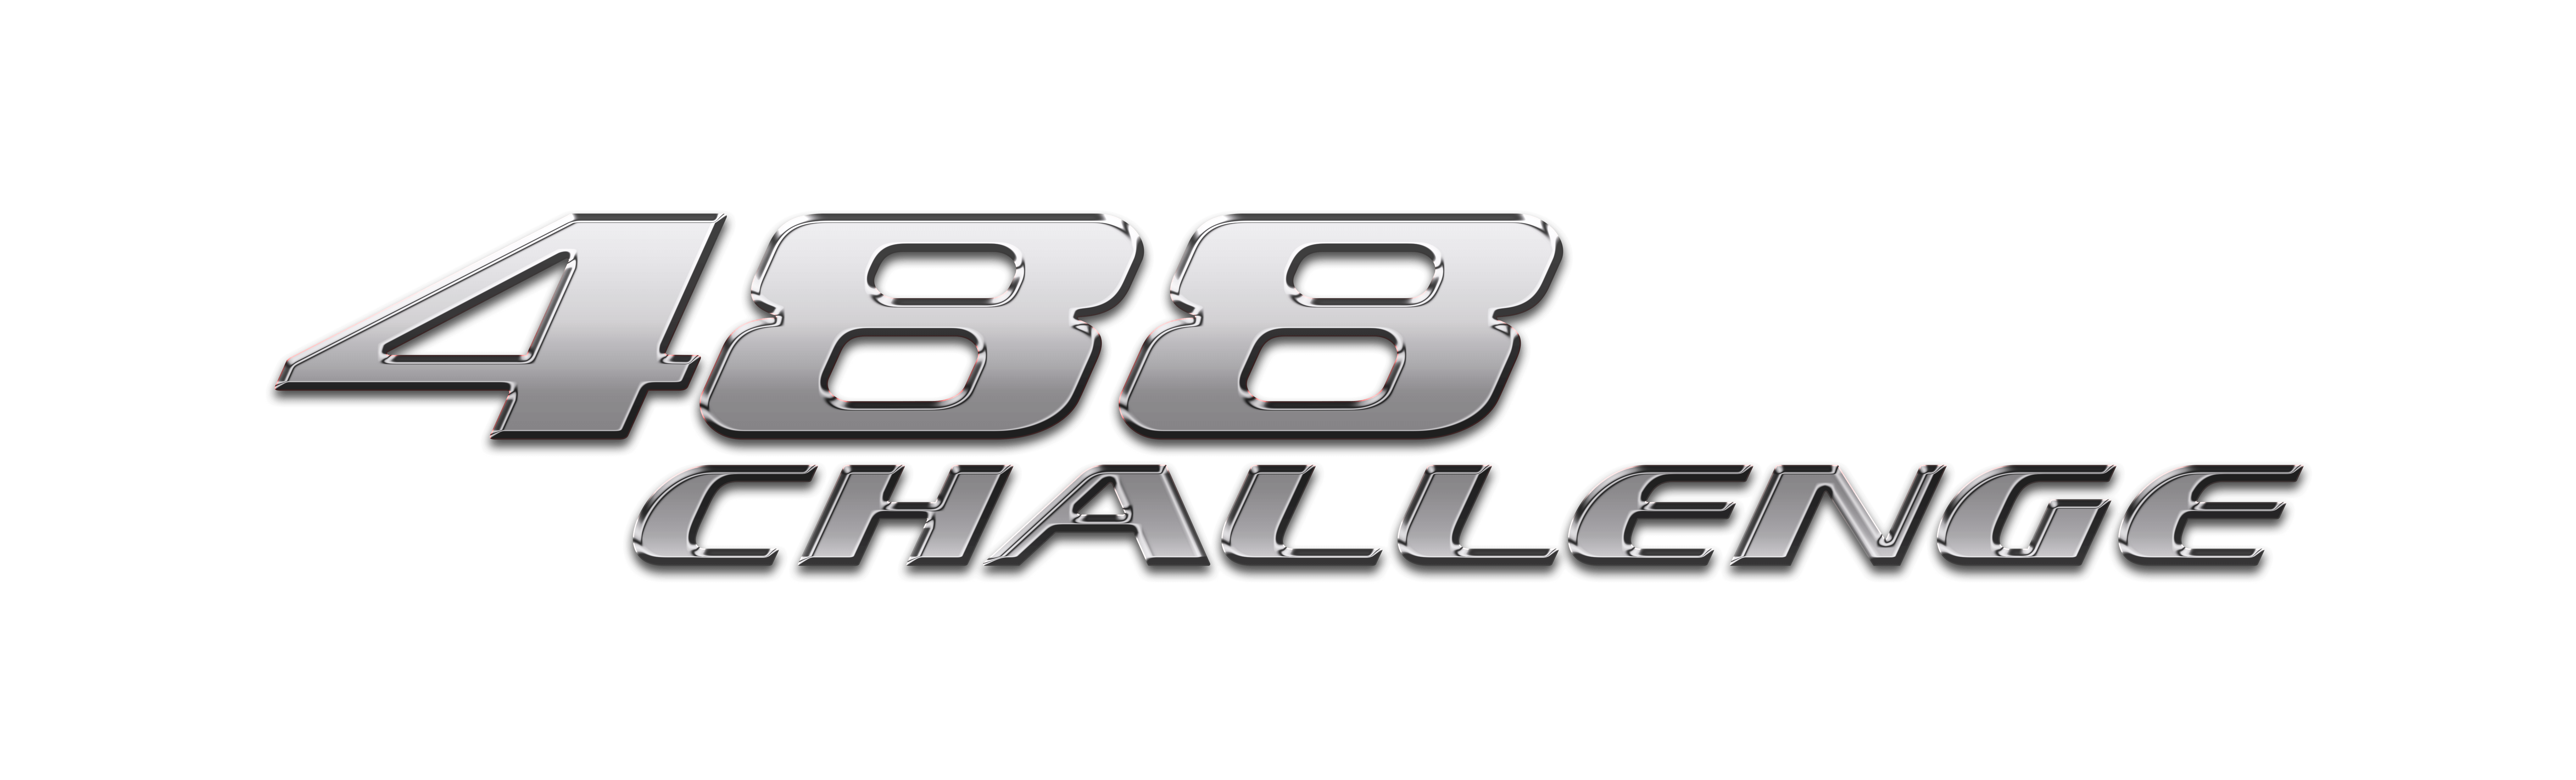 Challenge Logo Png Png Image Collection